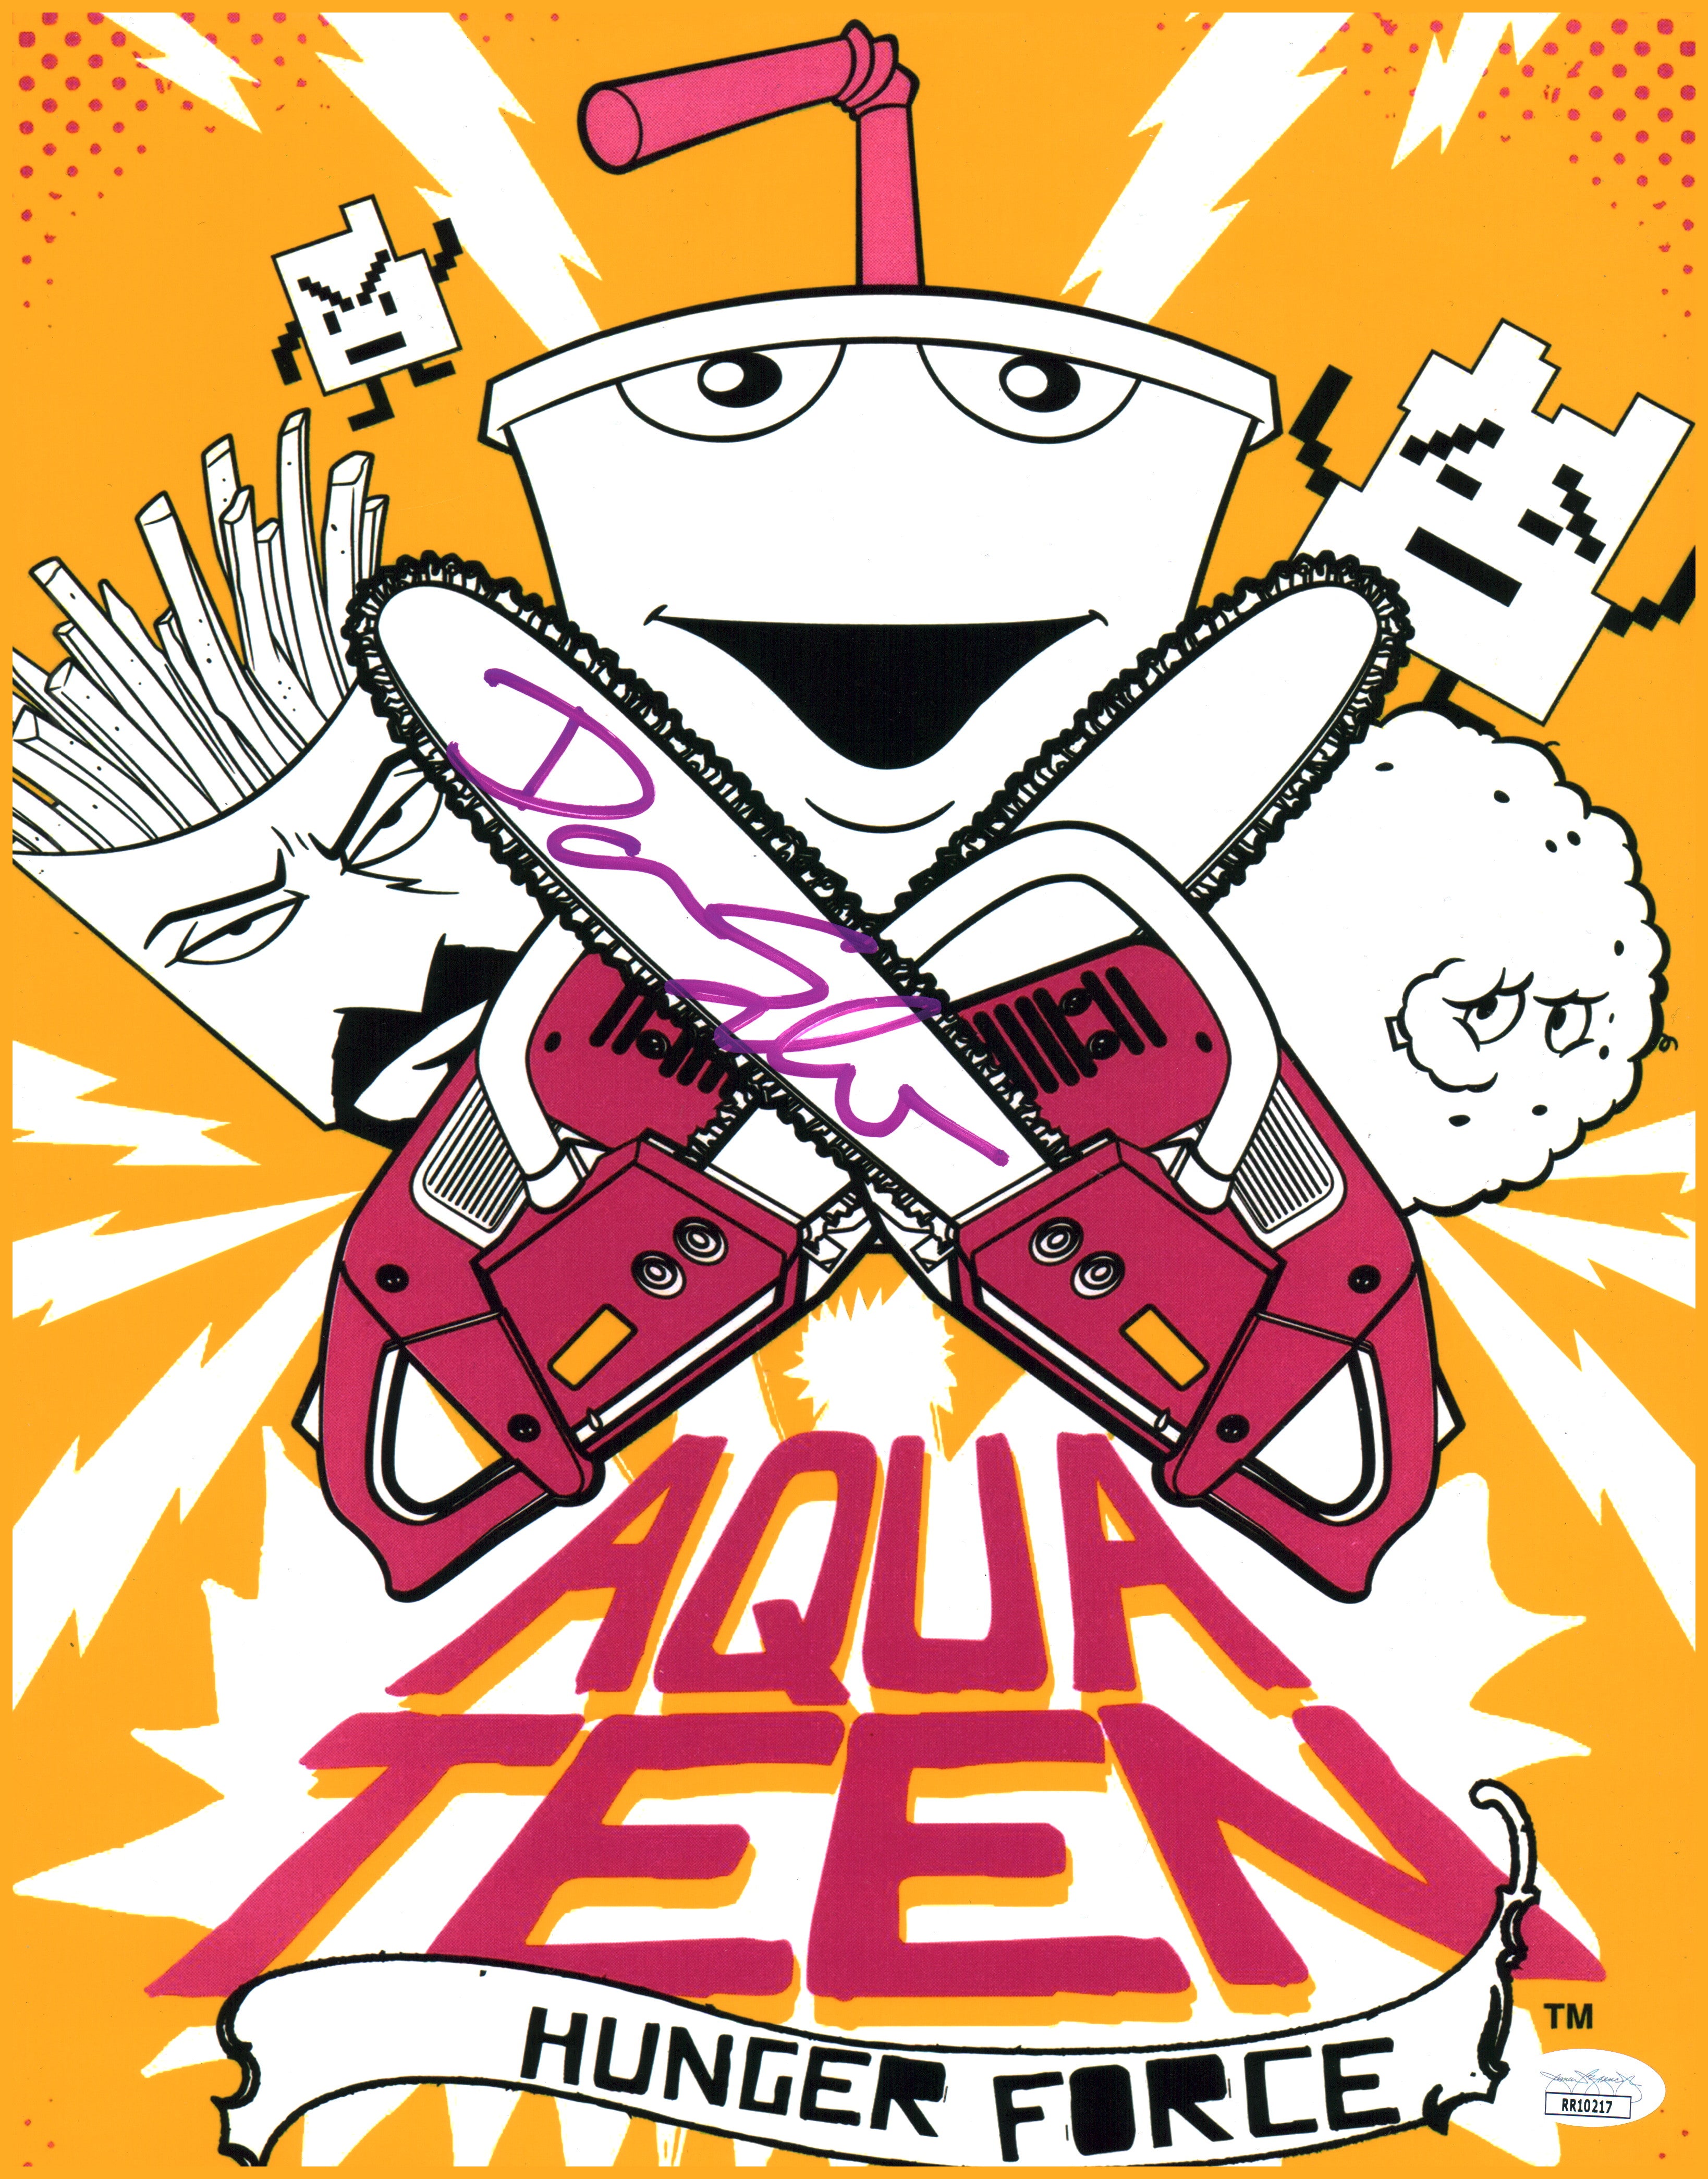 Dana Snyder Aqua Teen Hunger Force 11x14 Photo Poster Signed Autographed JSA Certified COA GalaxyCon